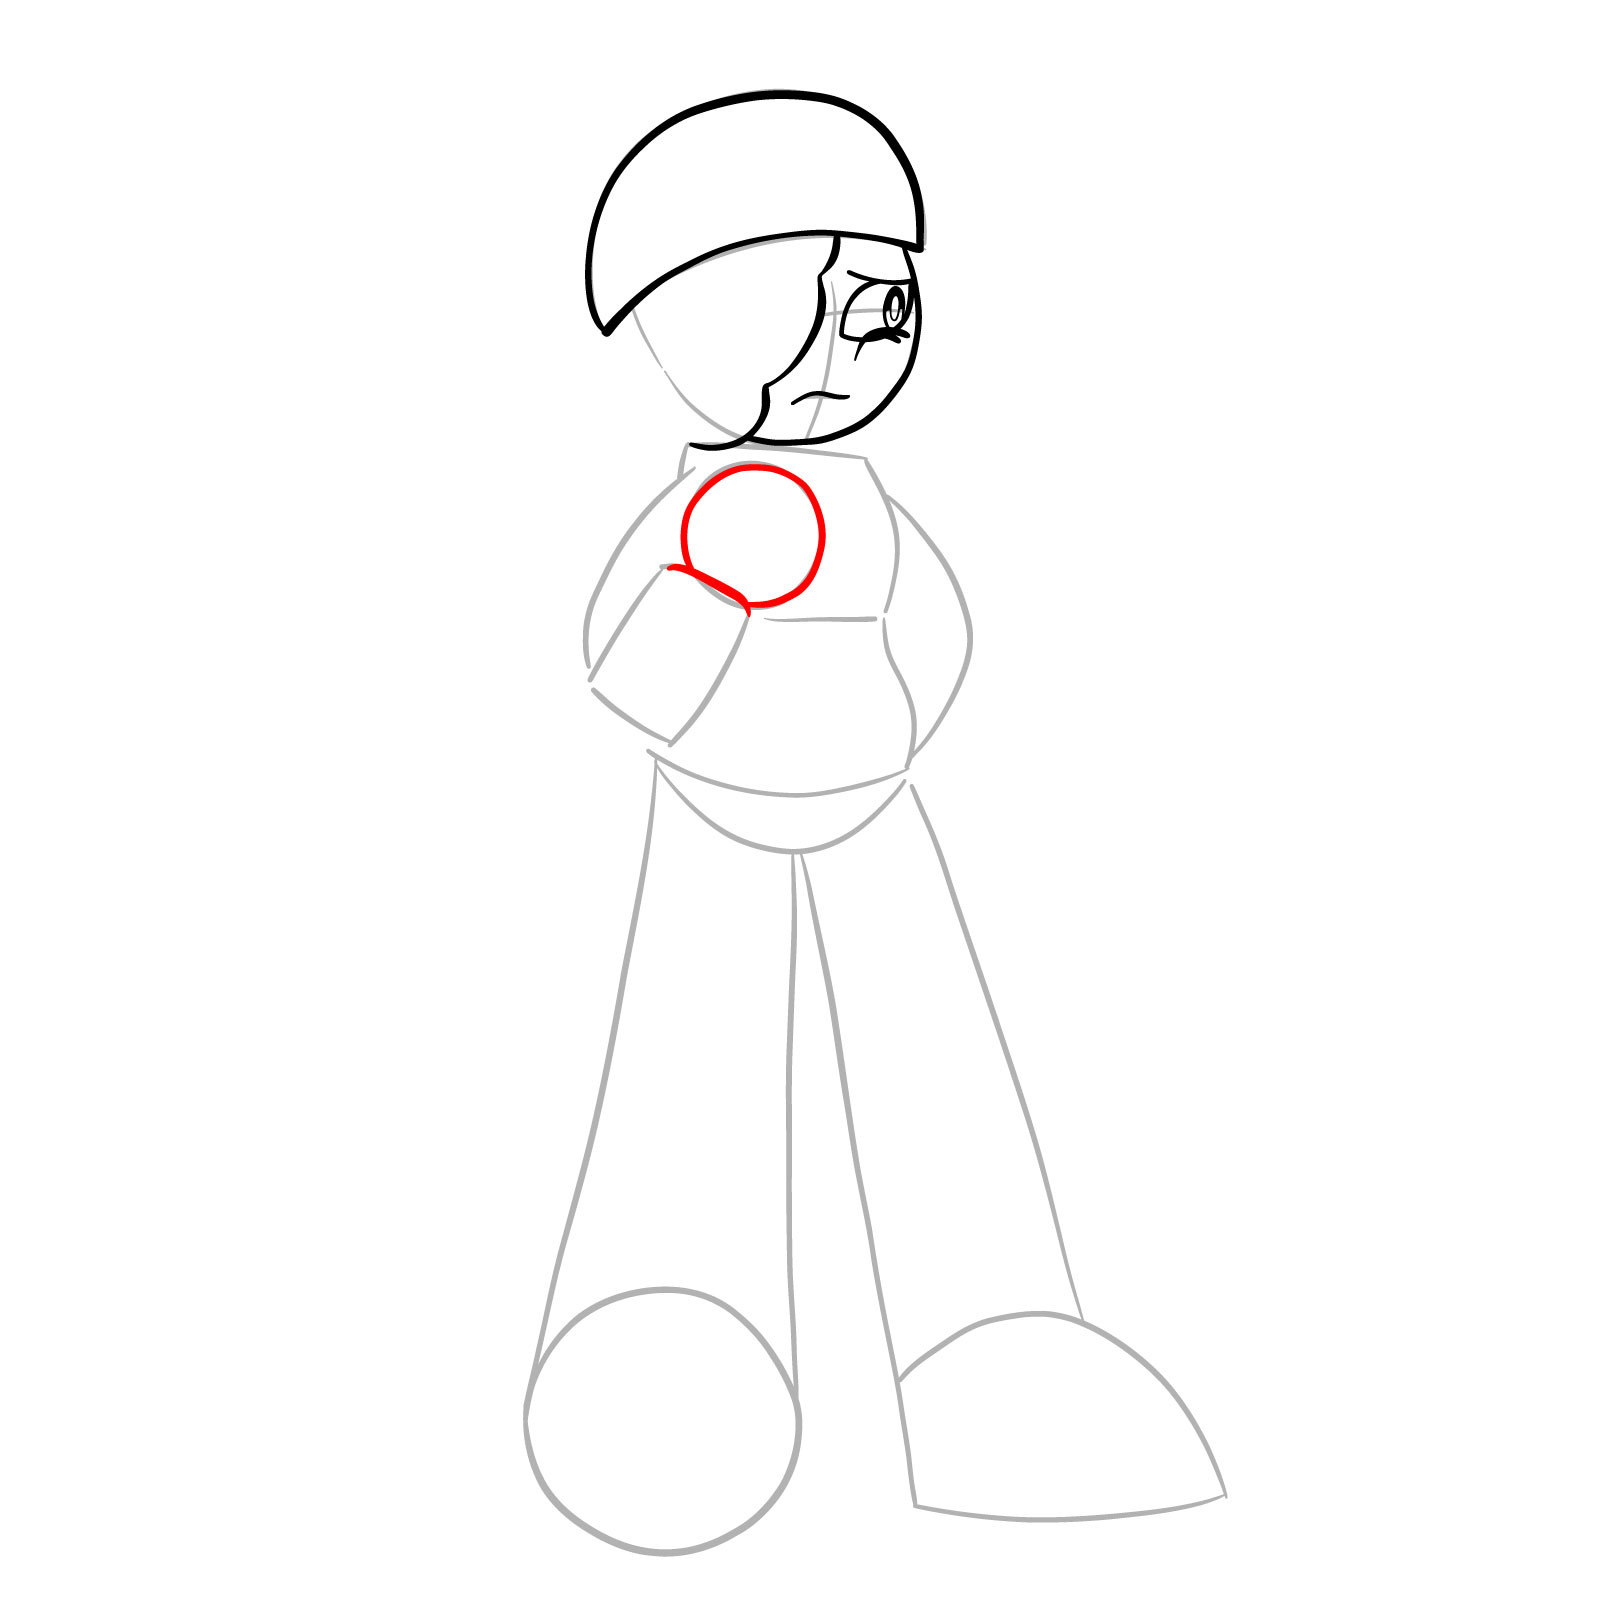 How to draw Ruby from FNF - step 12